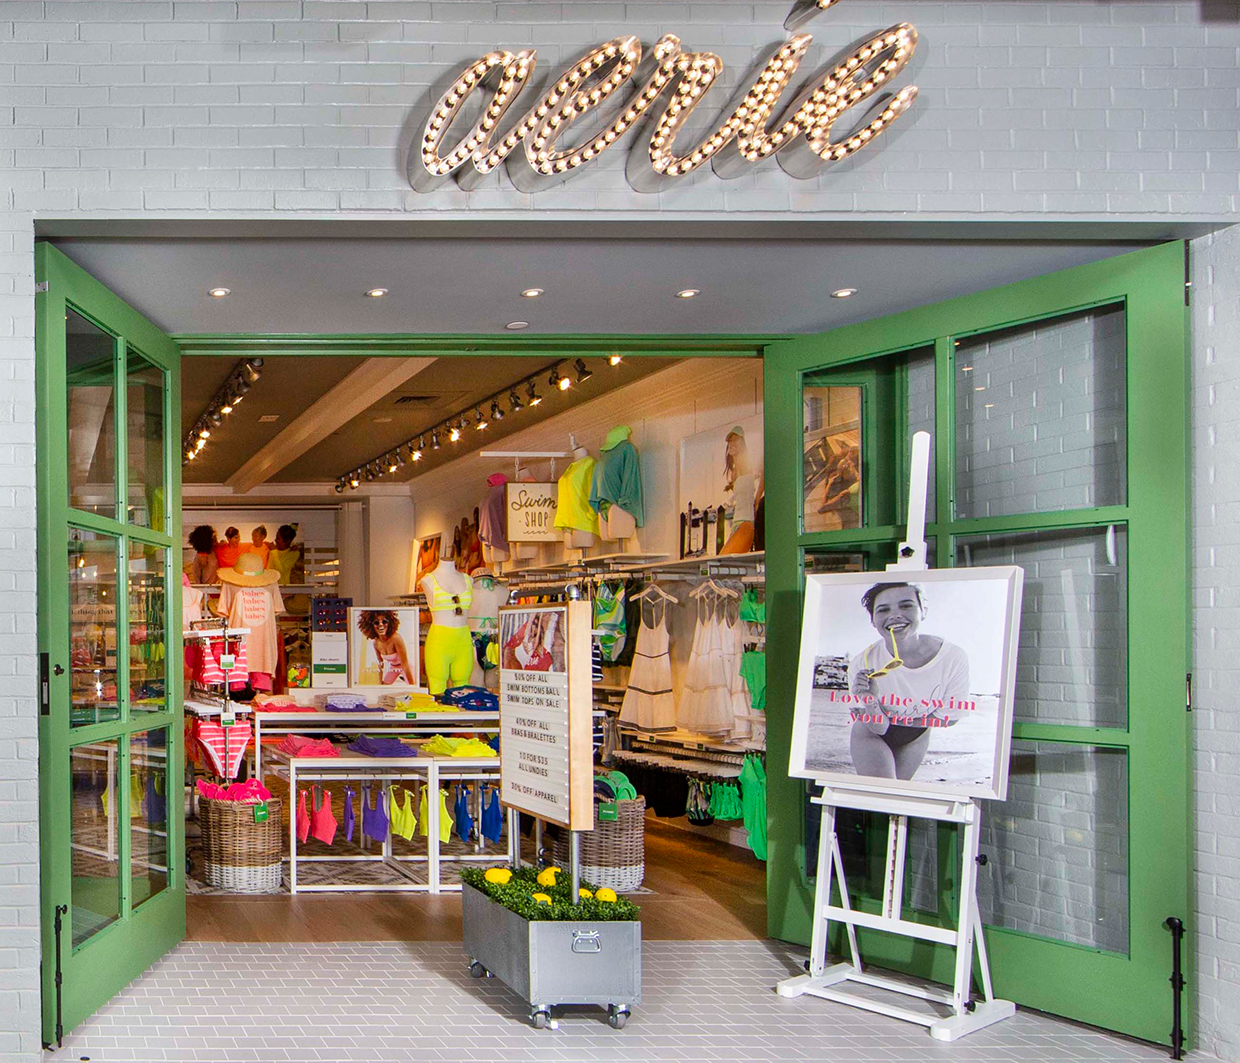 Introducing Our First OFFLINE by Aerie Store! - #AerieREAL Life